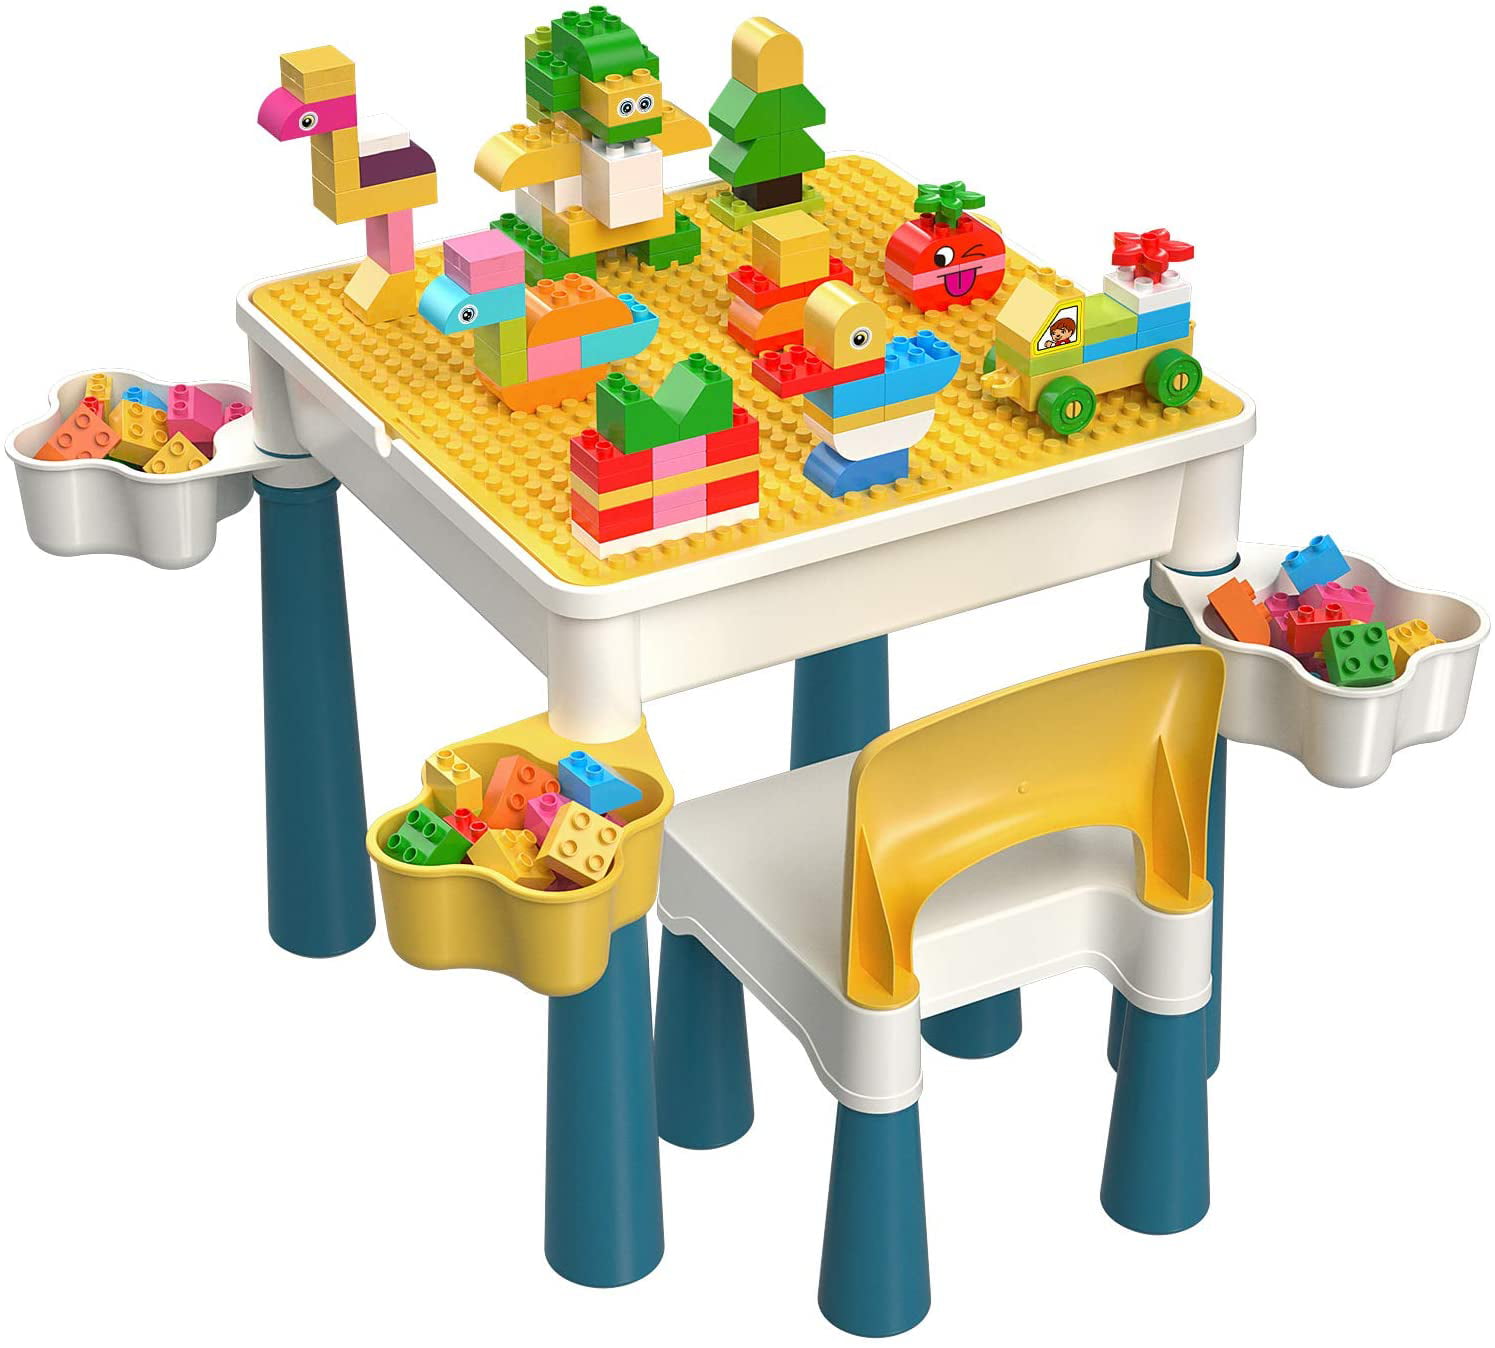 Frifer 5 in 1 Multi Kids Activity Building Table with Children's Table 130Pcs Blocks and 1 Chair Set and 4 Storage Boxes Kids Building Blocks Table and Chair Set Suitable for Boys and Girls